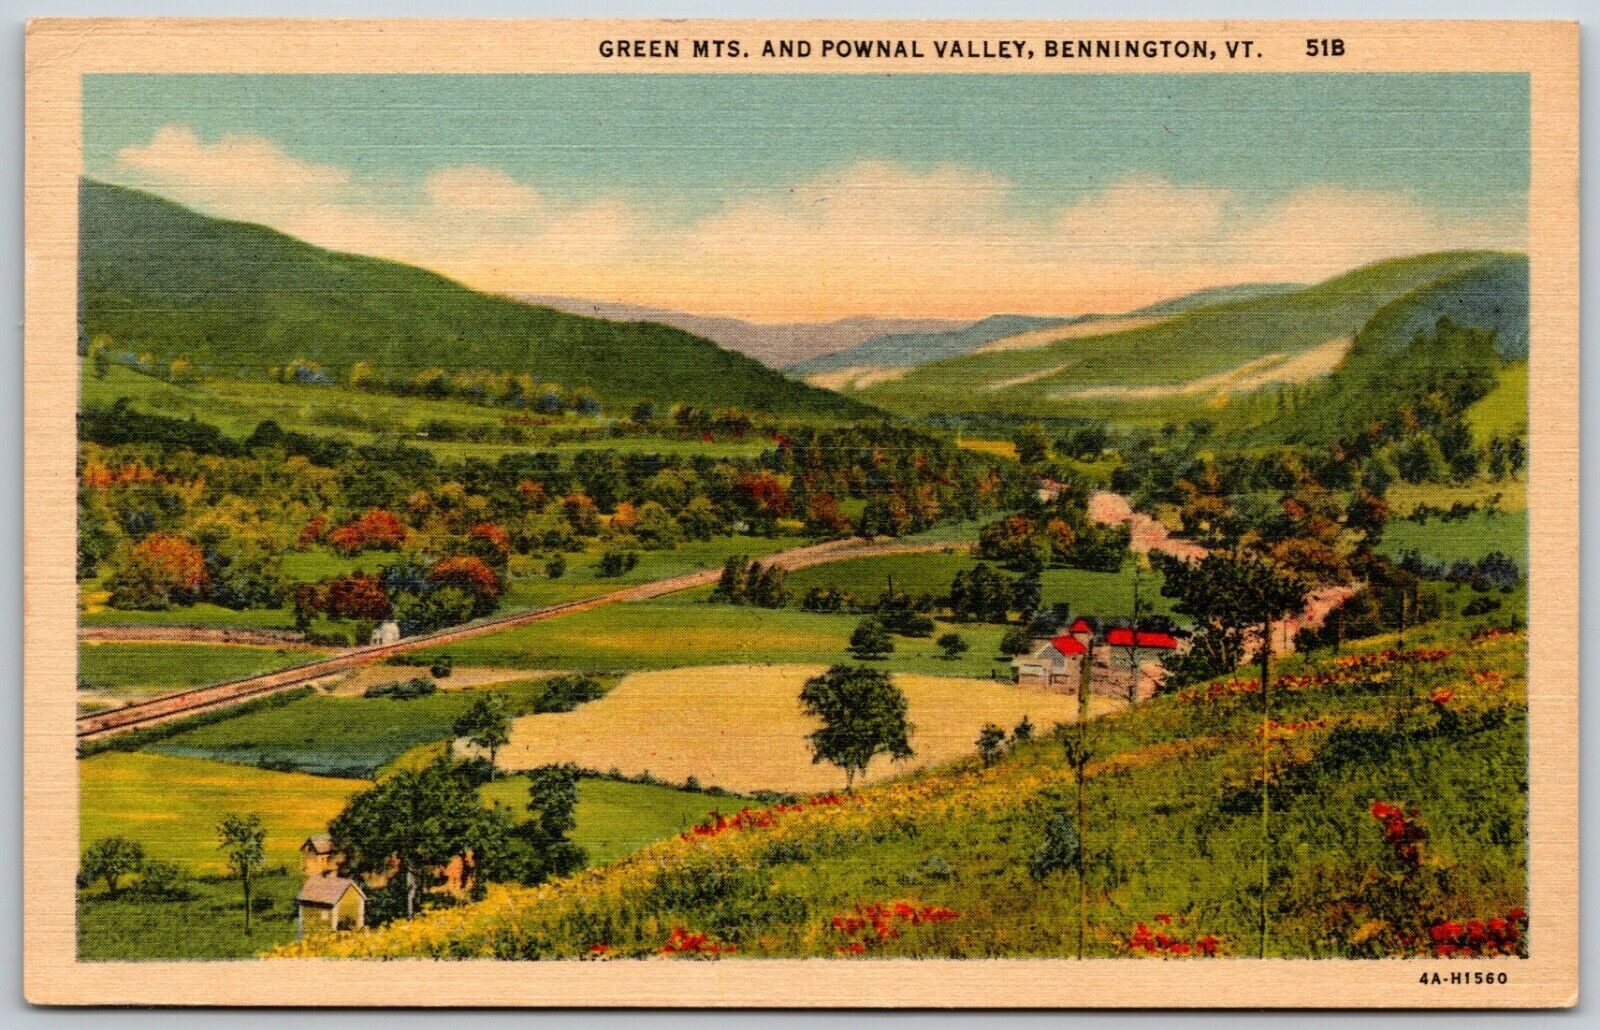 Green Mountains and Pownal Valley, Vermont - Postcard